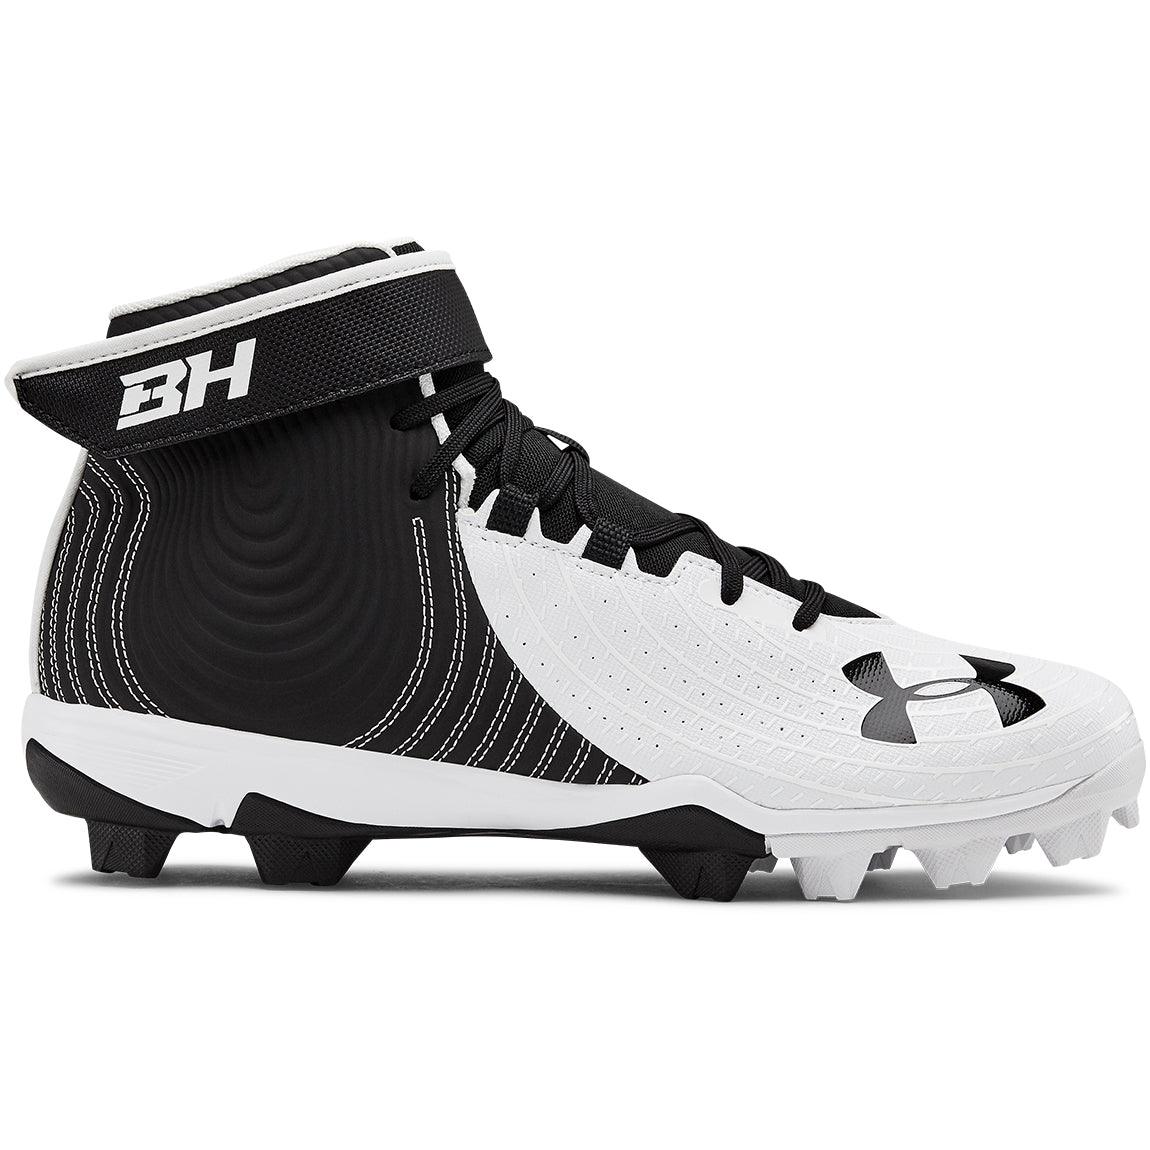 Harper 4 Mid Cleats - Sports Excellence